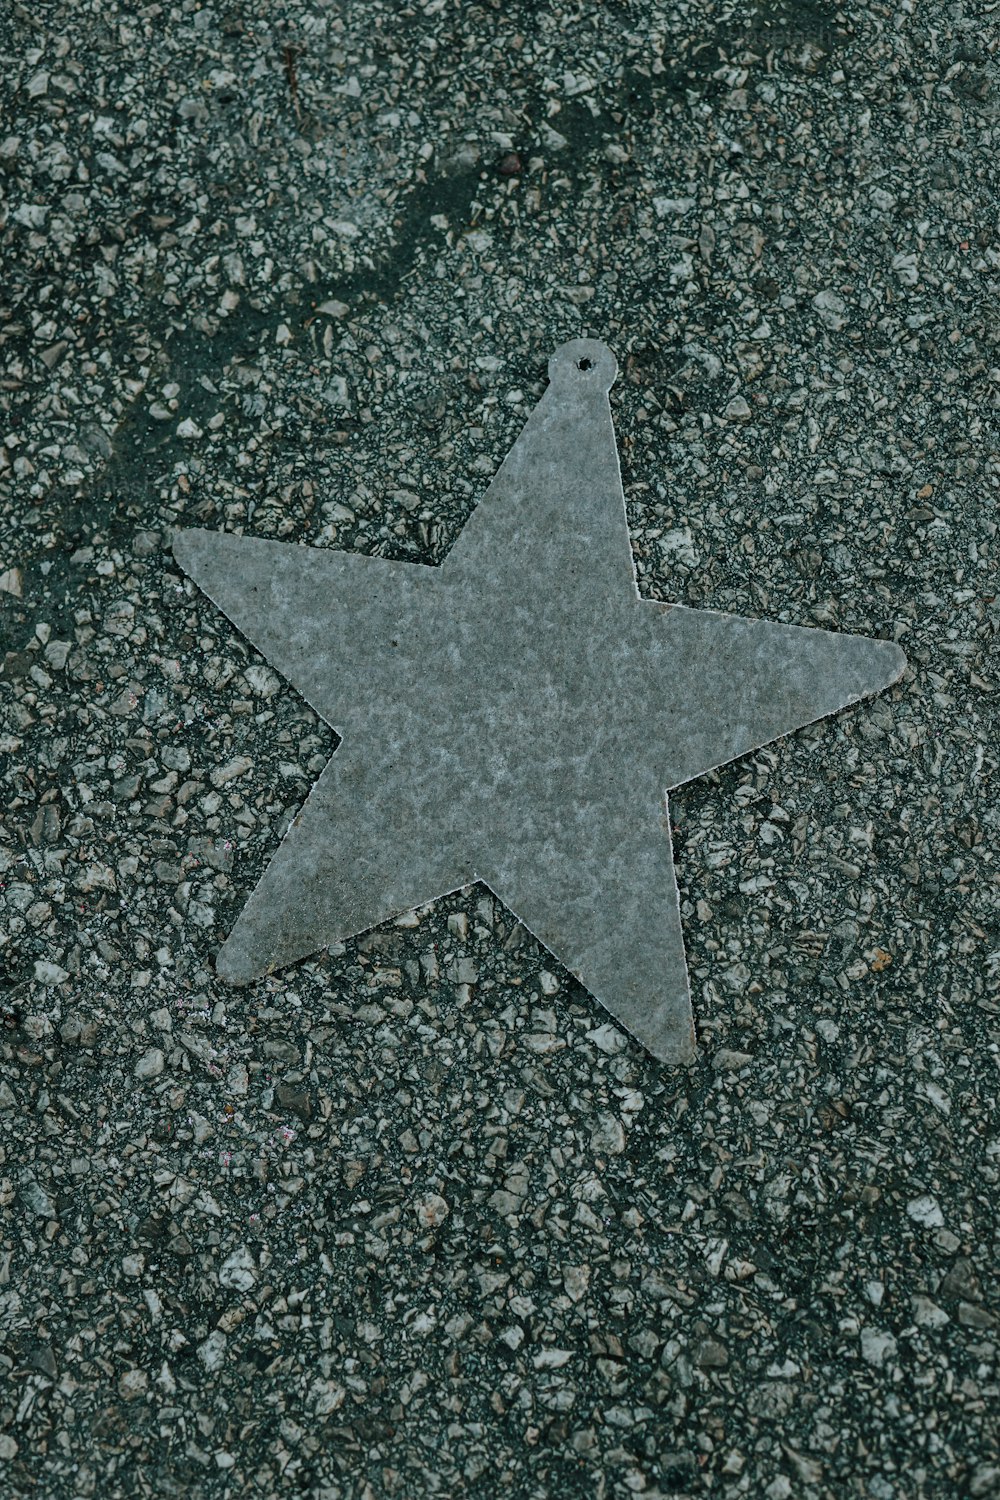 a star on the ground with gravel around it